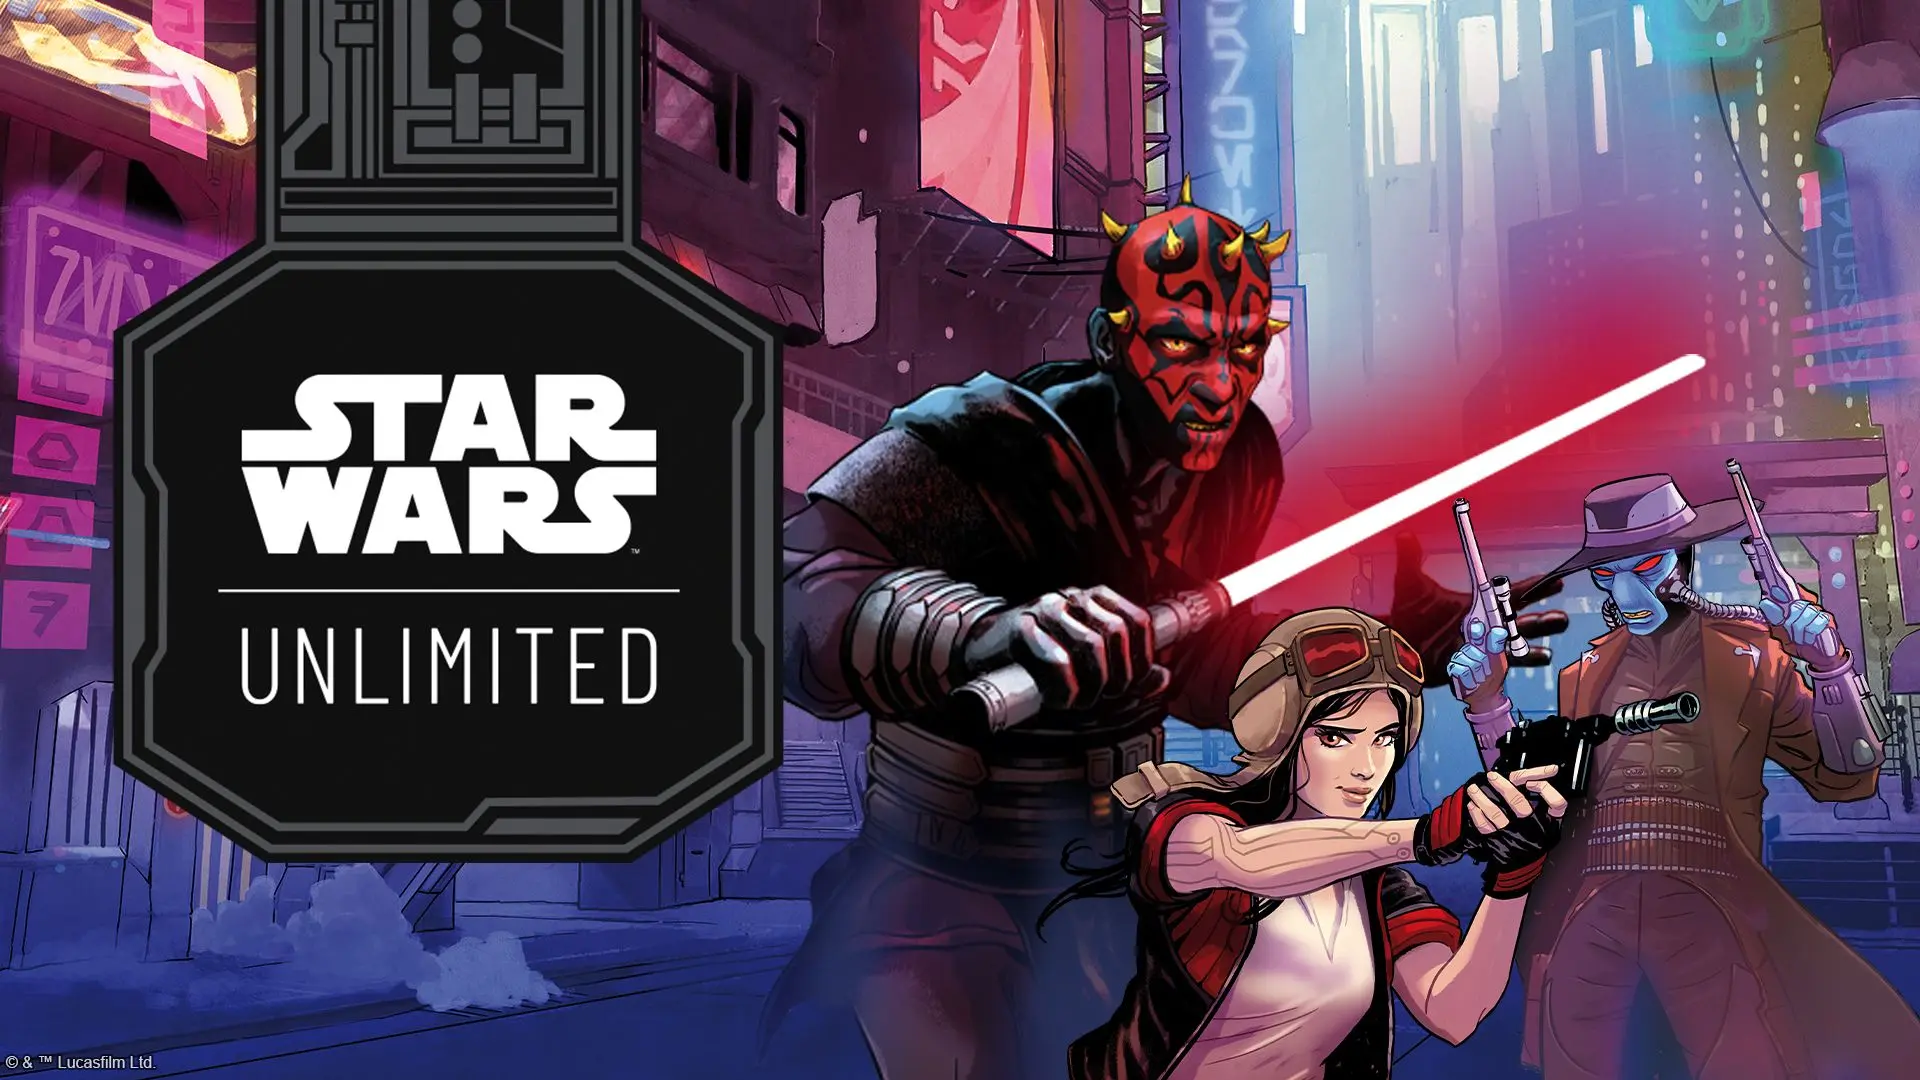 Star Wars: Unlimited - Shadows of the Galaxy